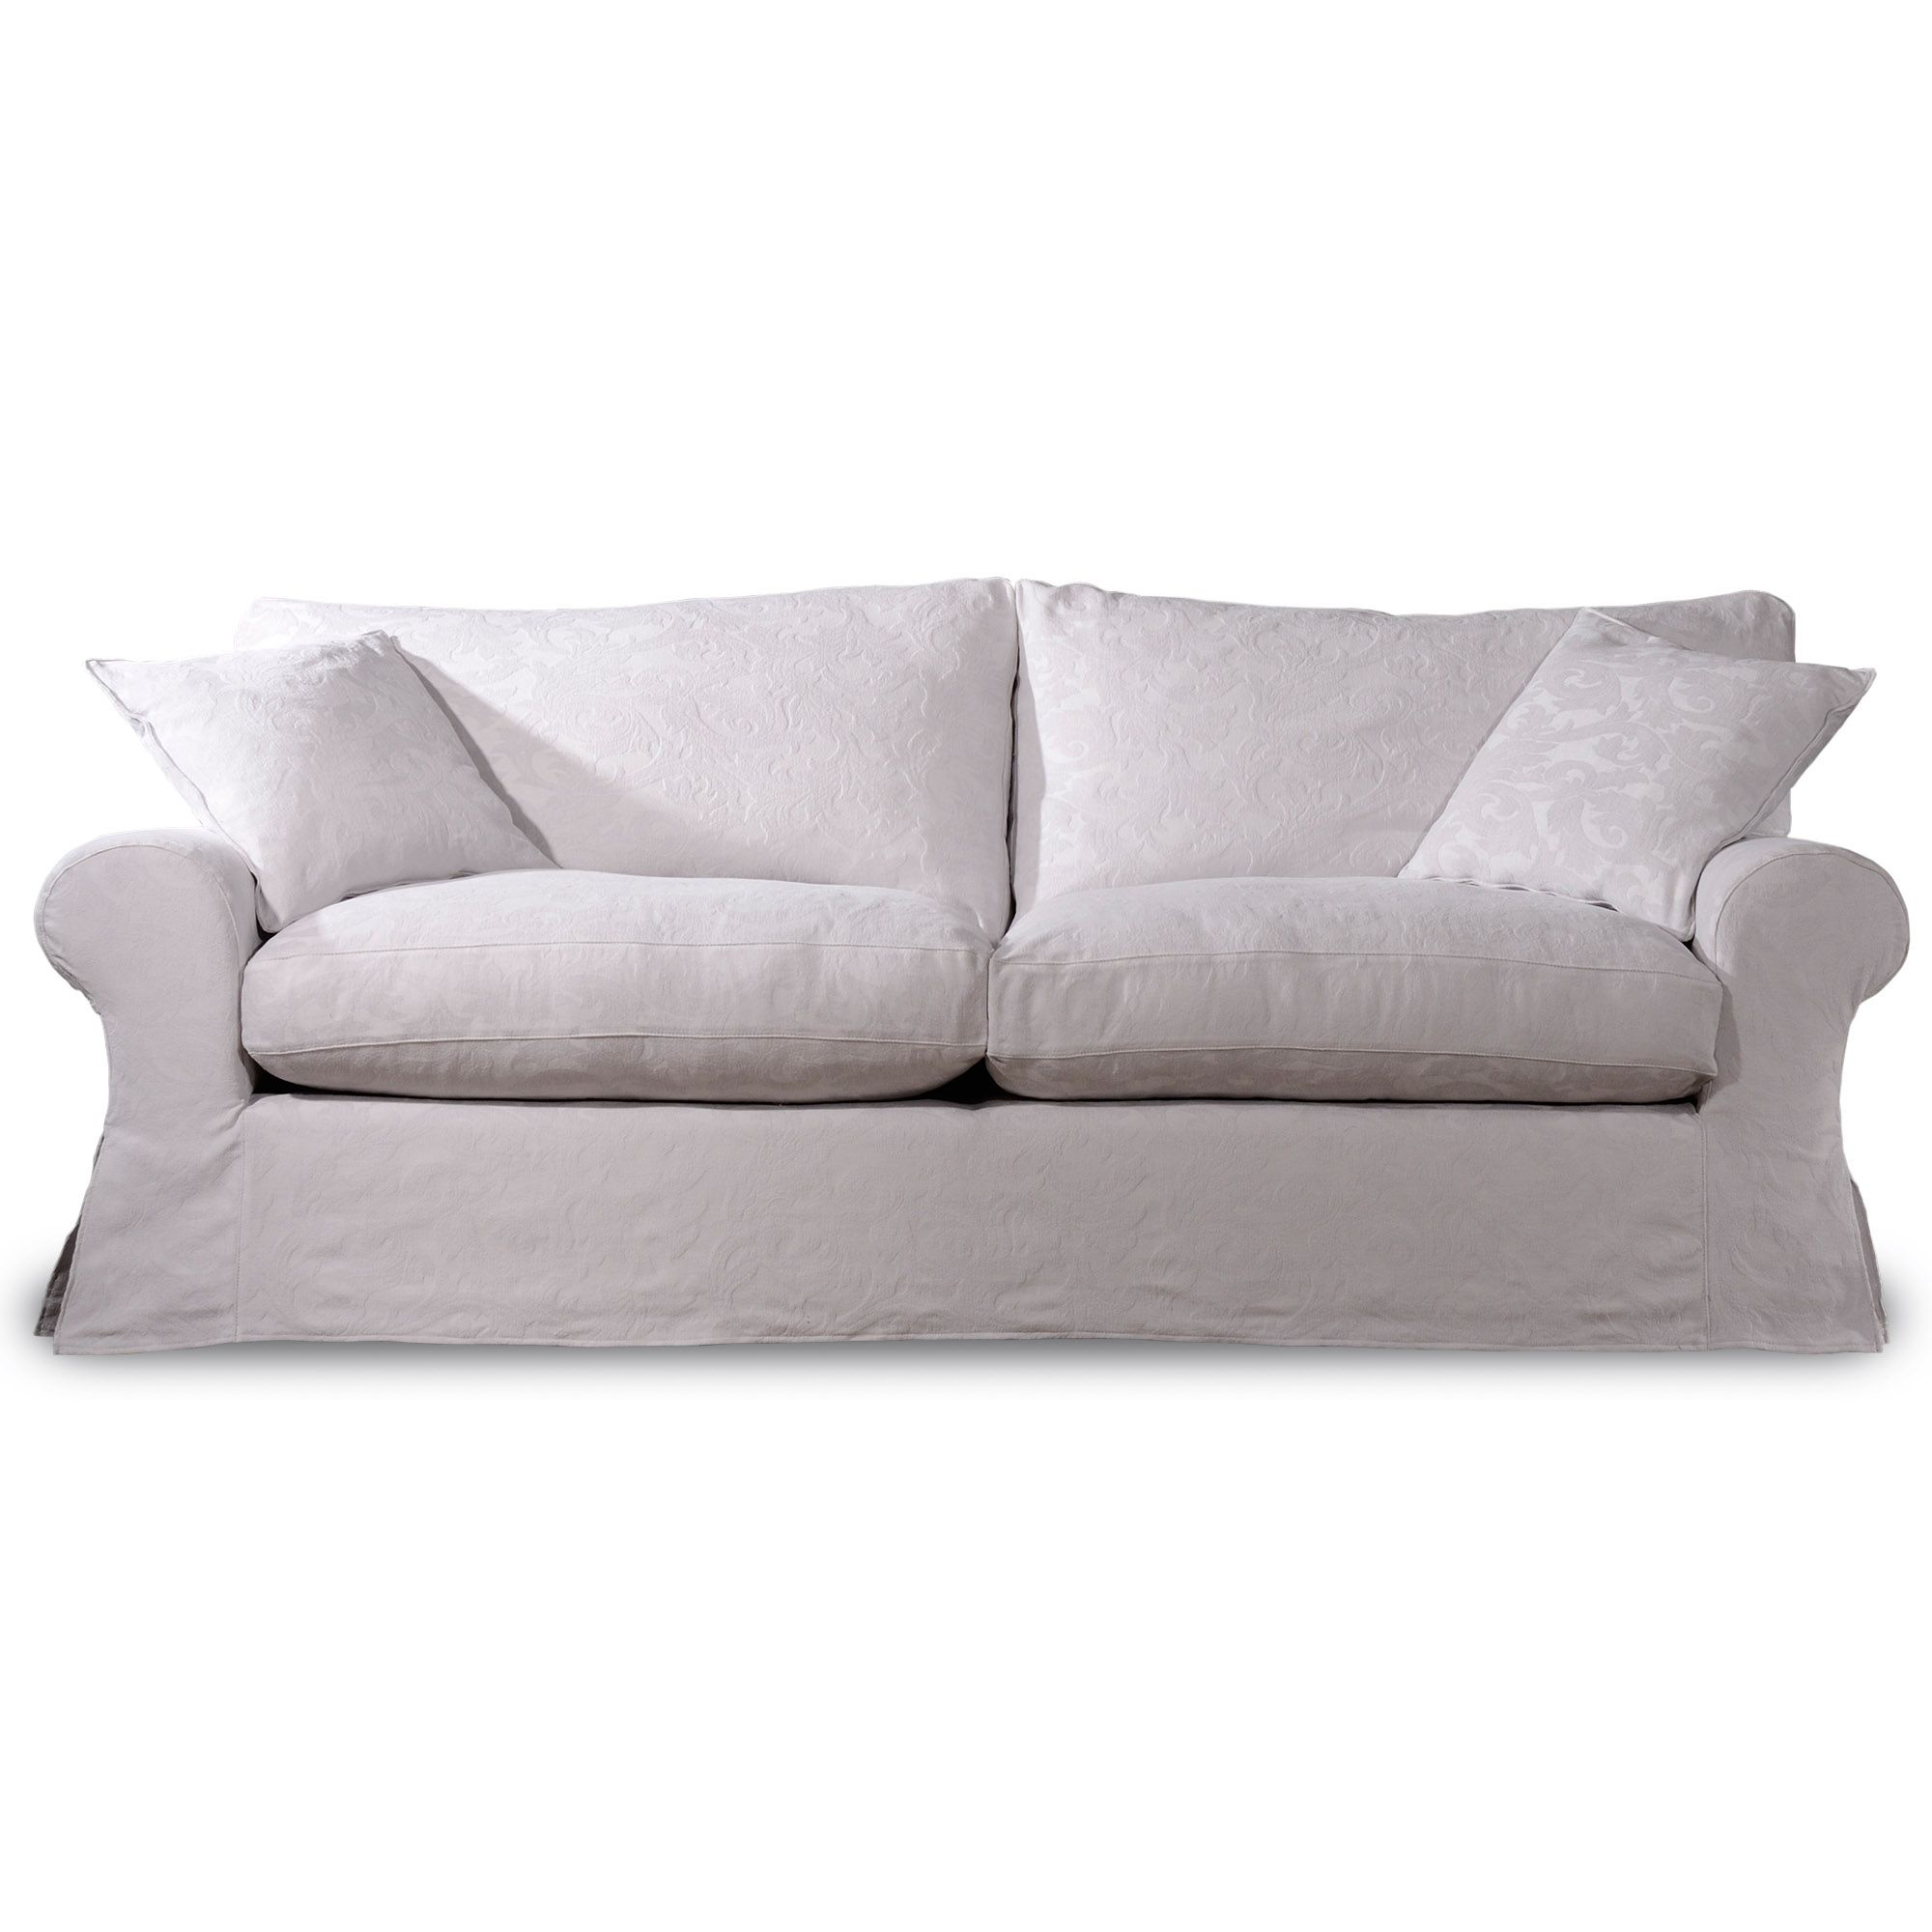 Tetrad Alexia 3 Seater Sofa With, How To Dye A Sofa Without Removable Covers